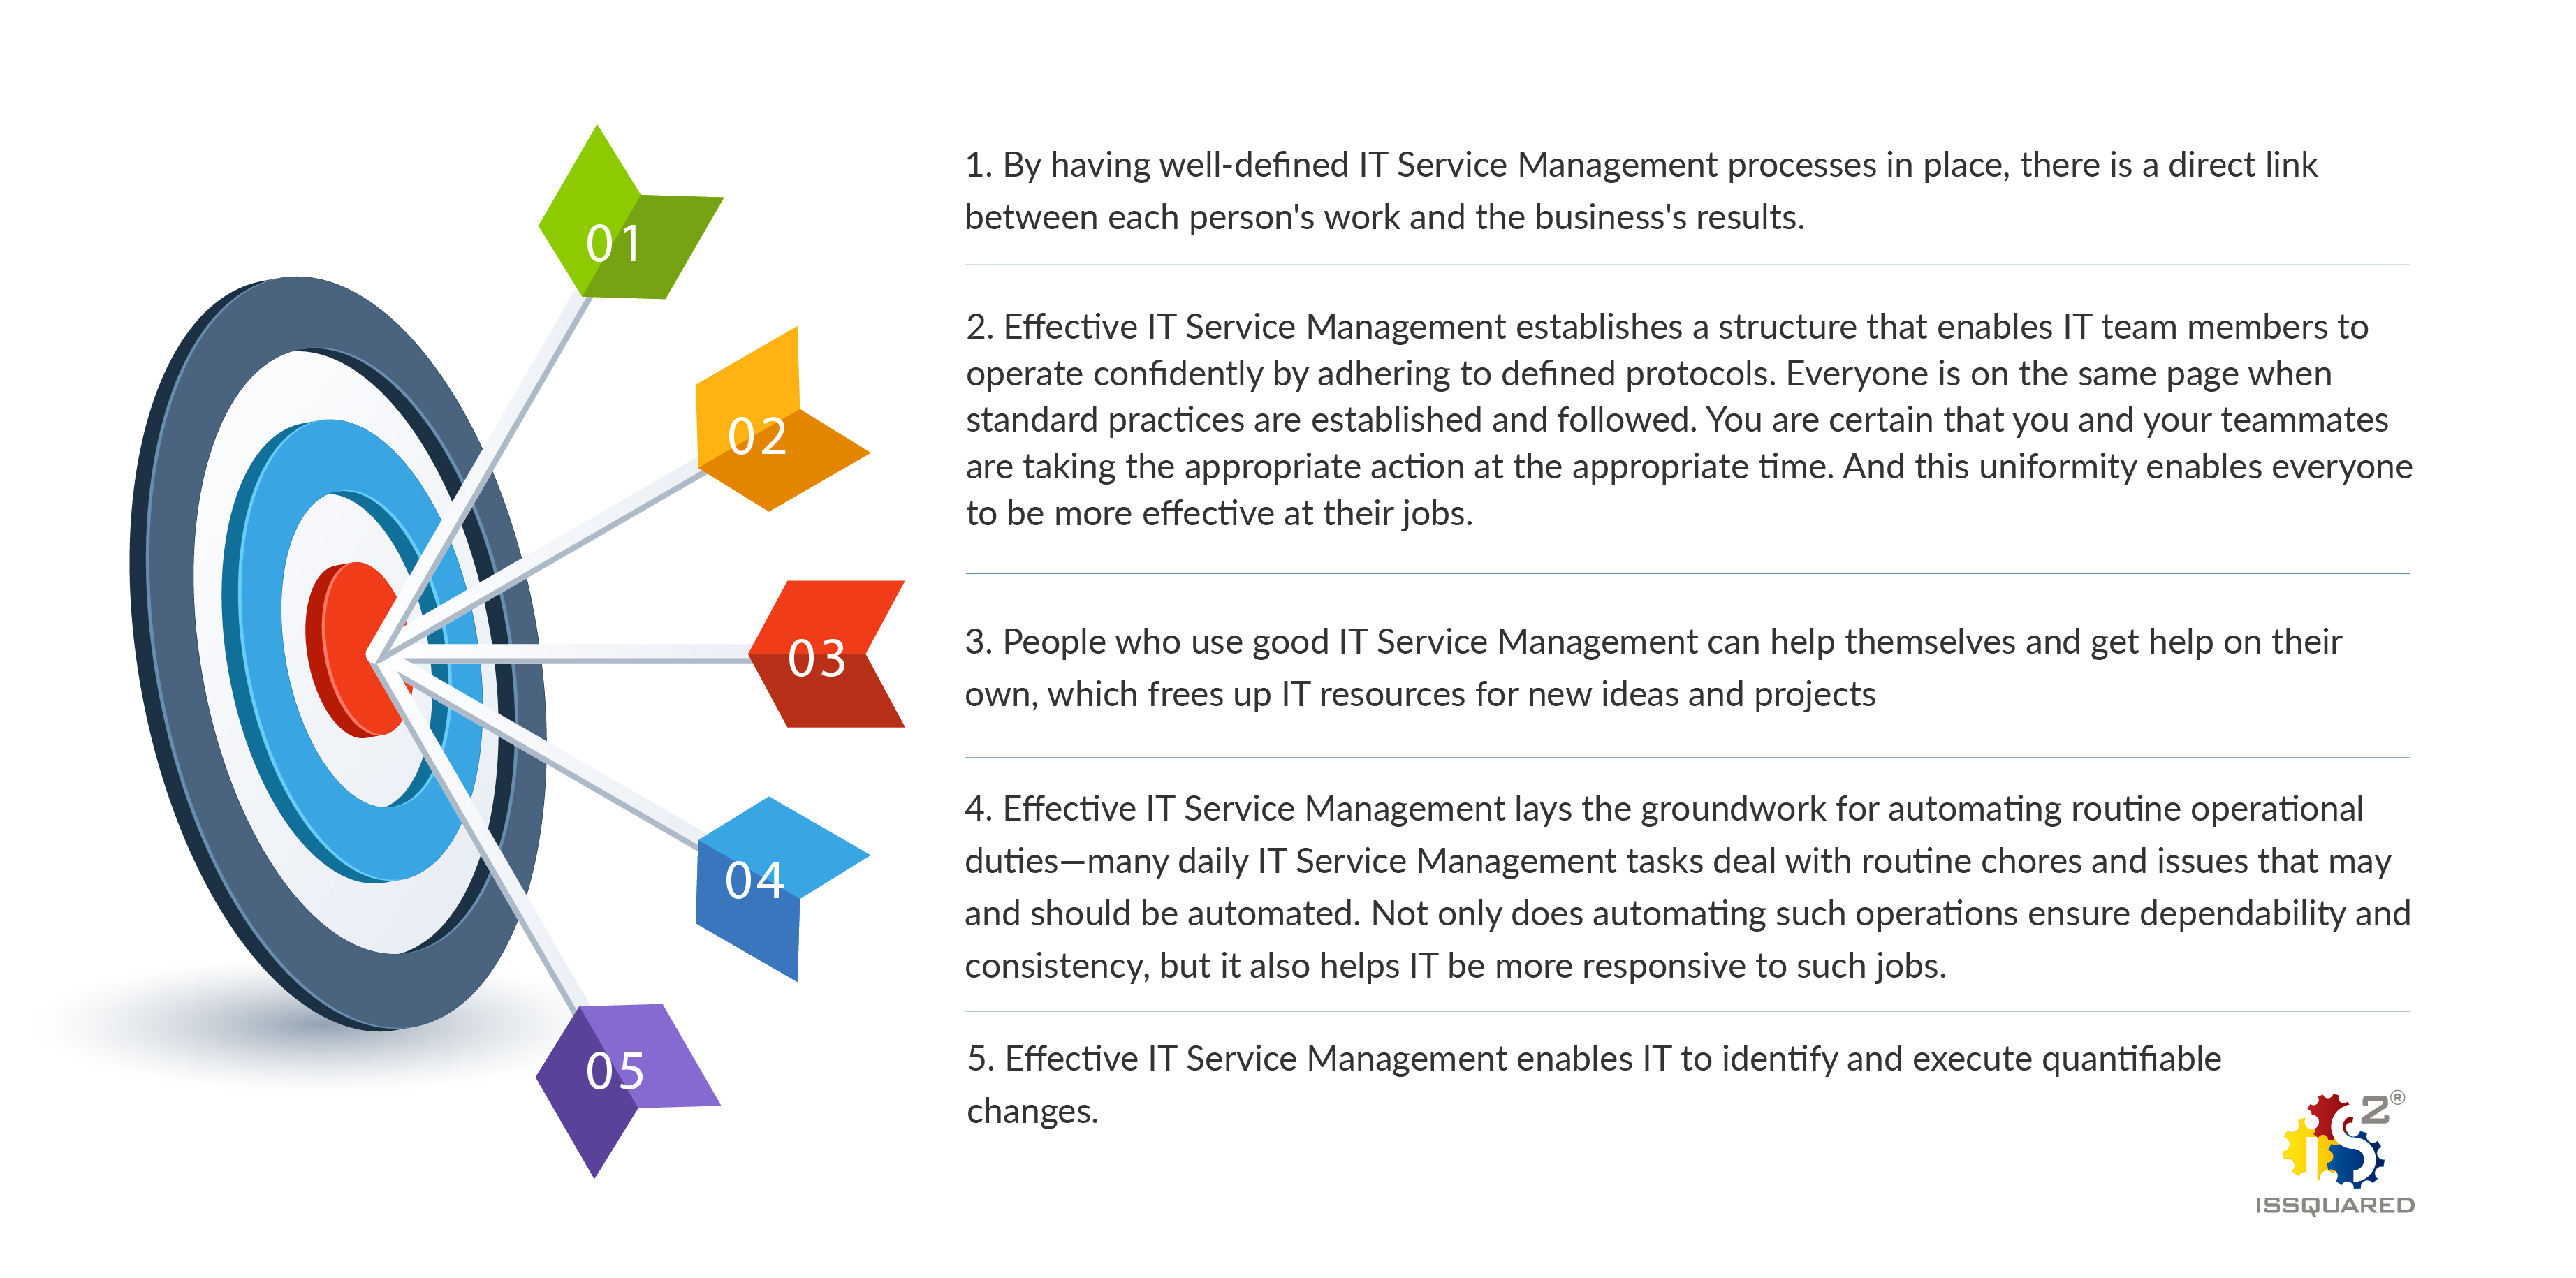 Why is IT Service Management